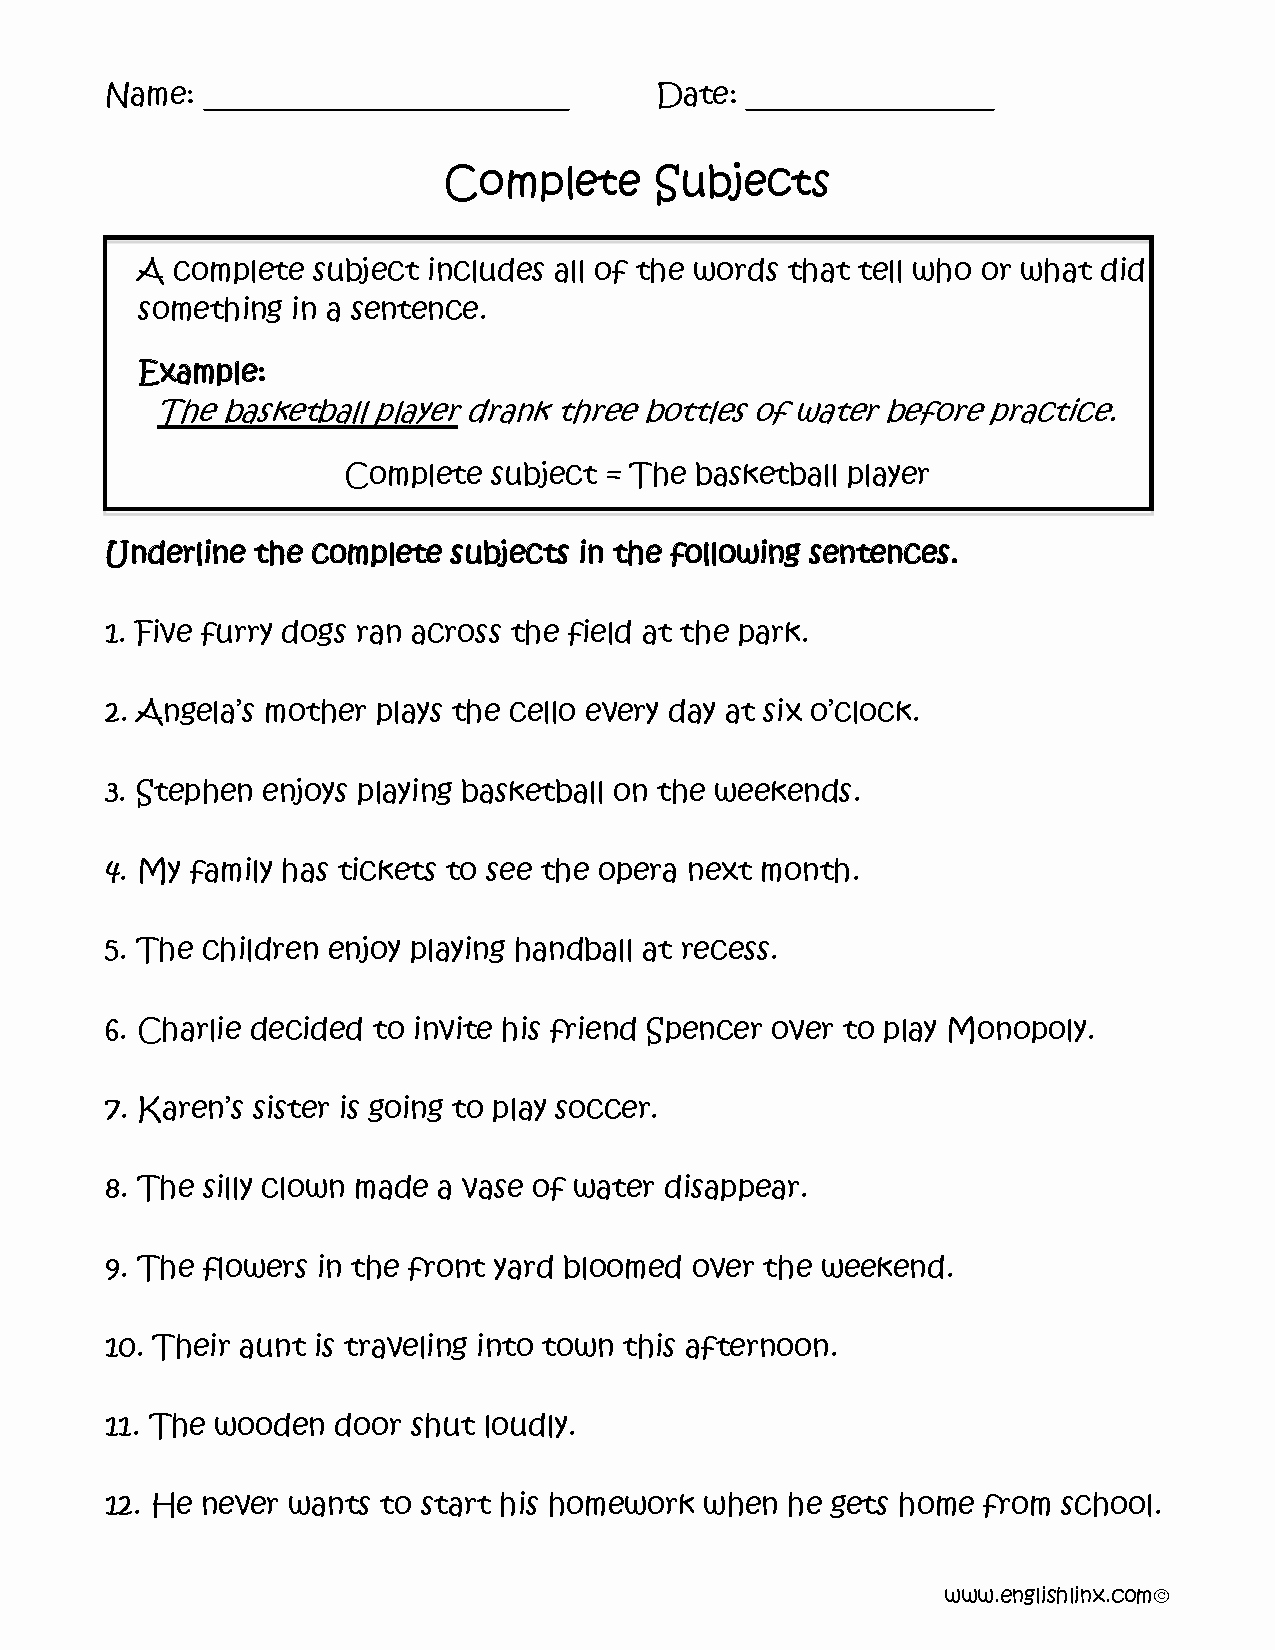 Subject and Predicate Worksheet Best Of Plete Subjects Worksheets